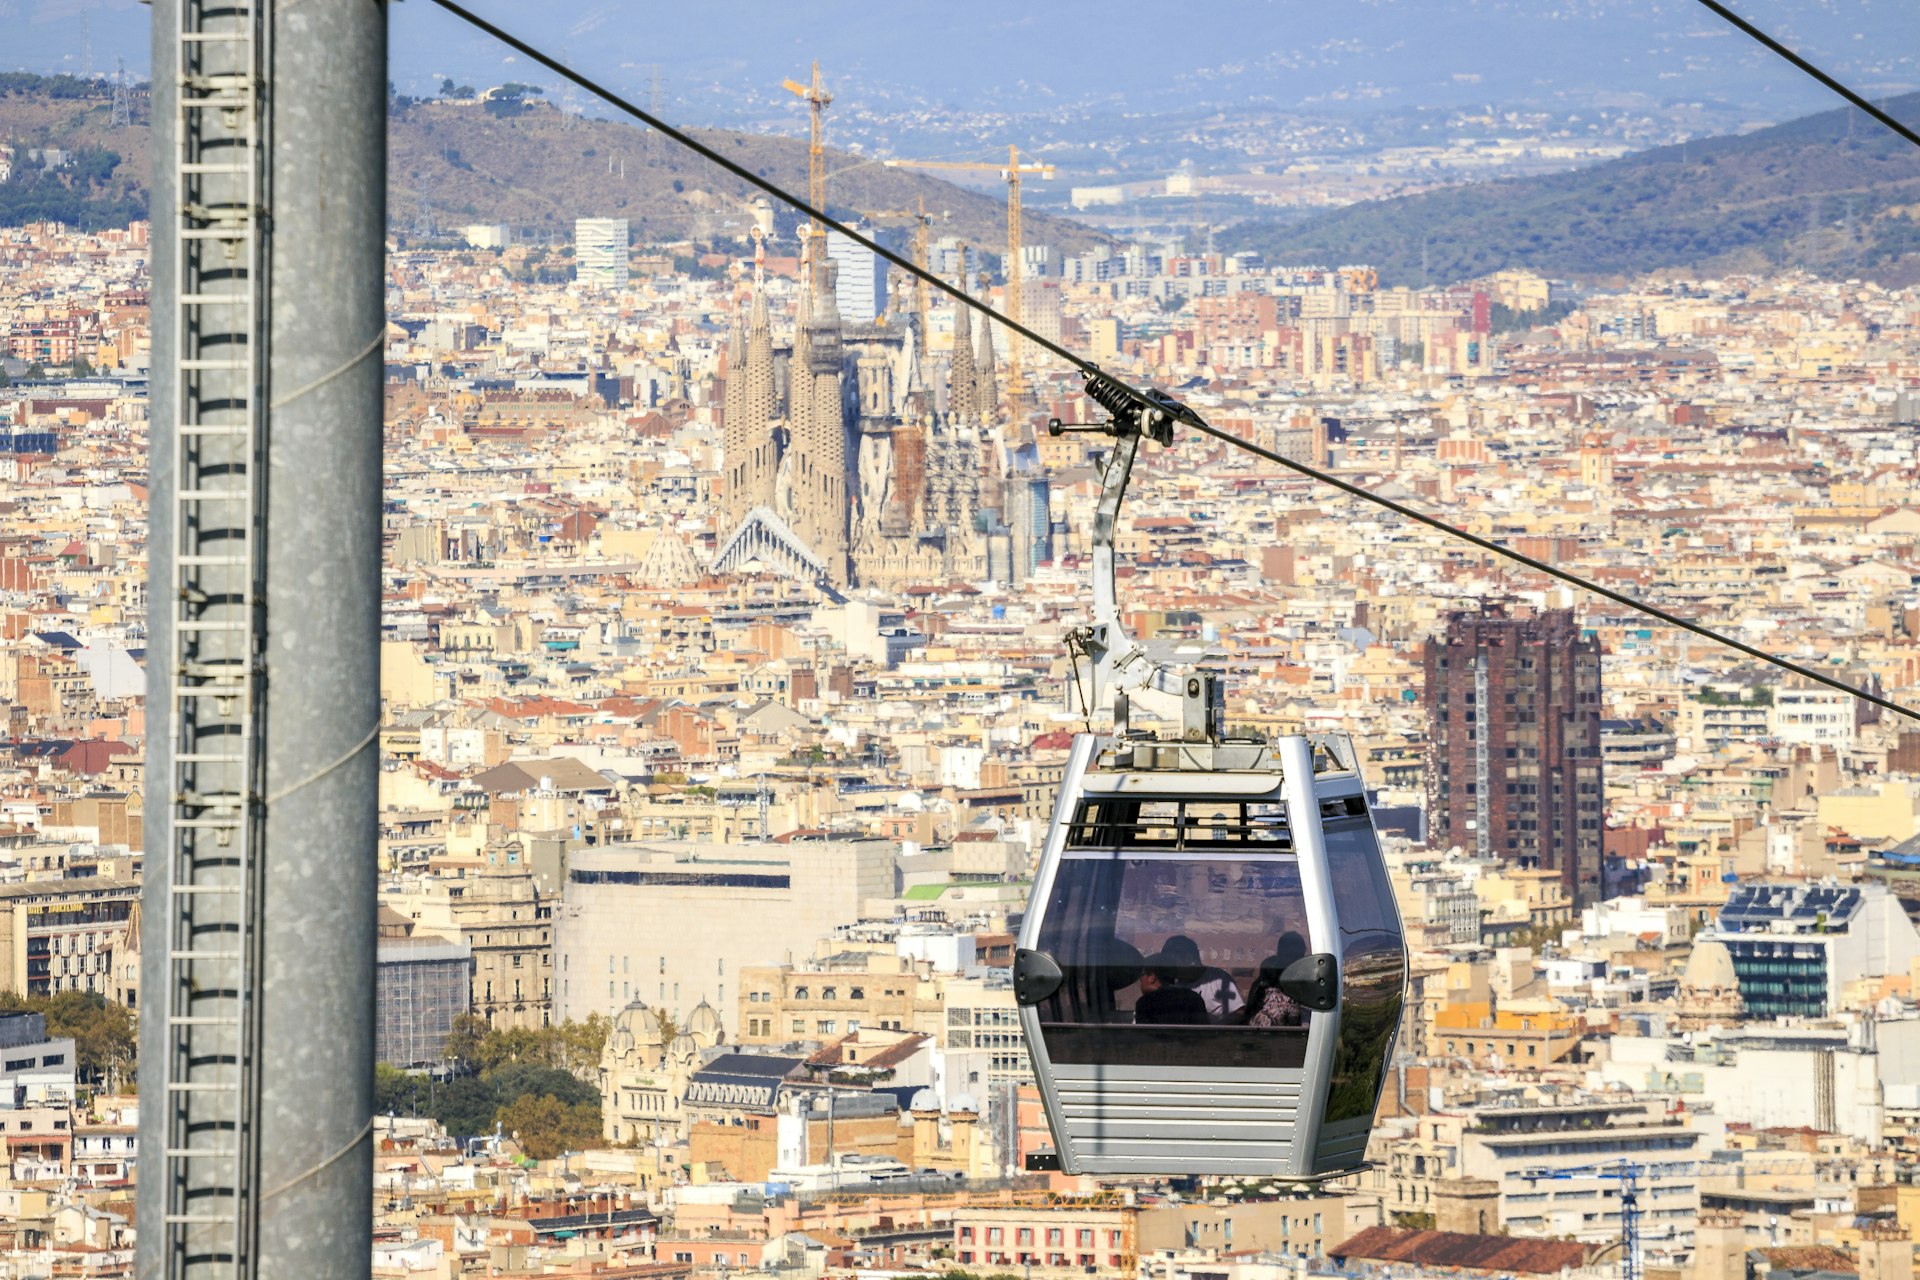 Montjuic cable car with Barcelona skyline in background